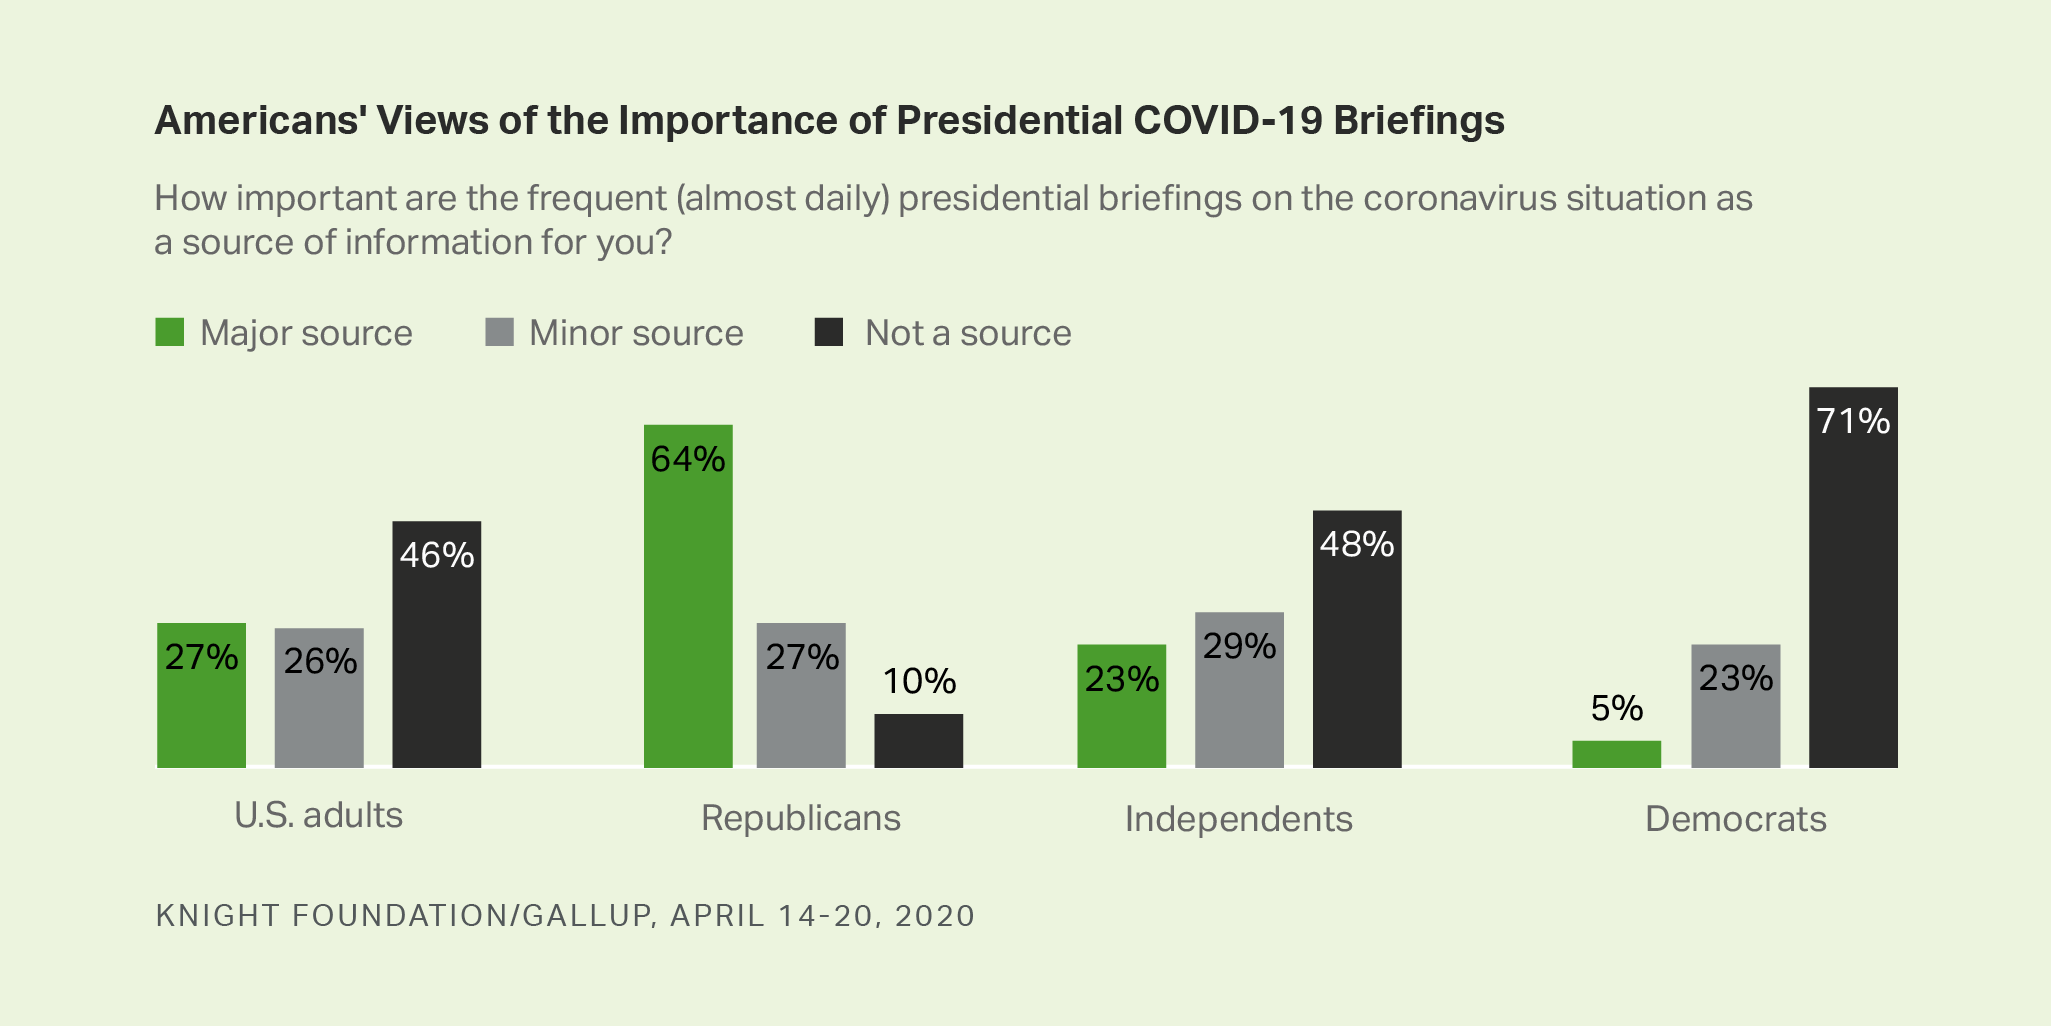 Bar graph. Americans’ view of the importance of presidential COVID-19 briefings, including partisans’ views.